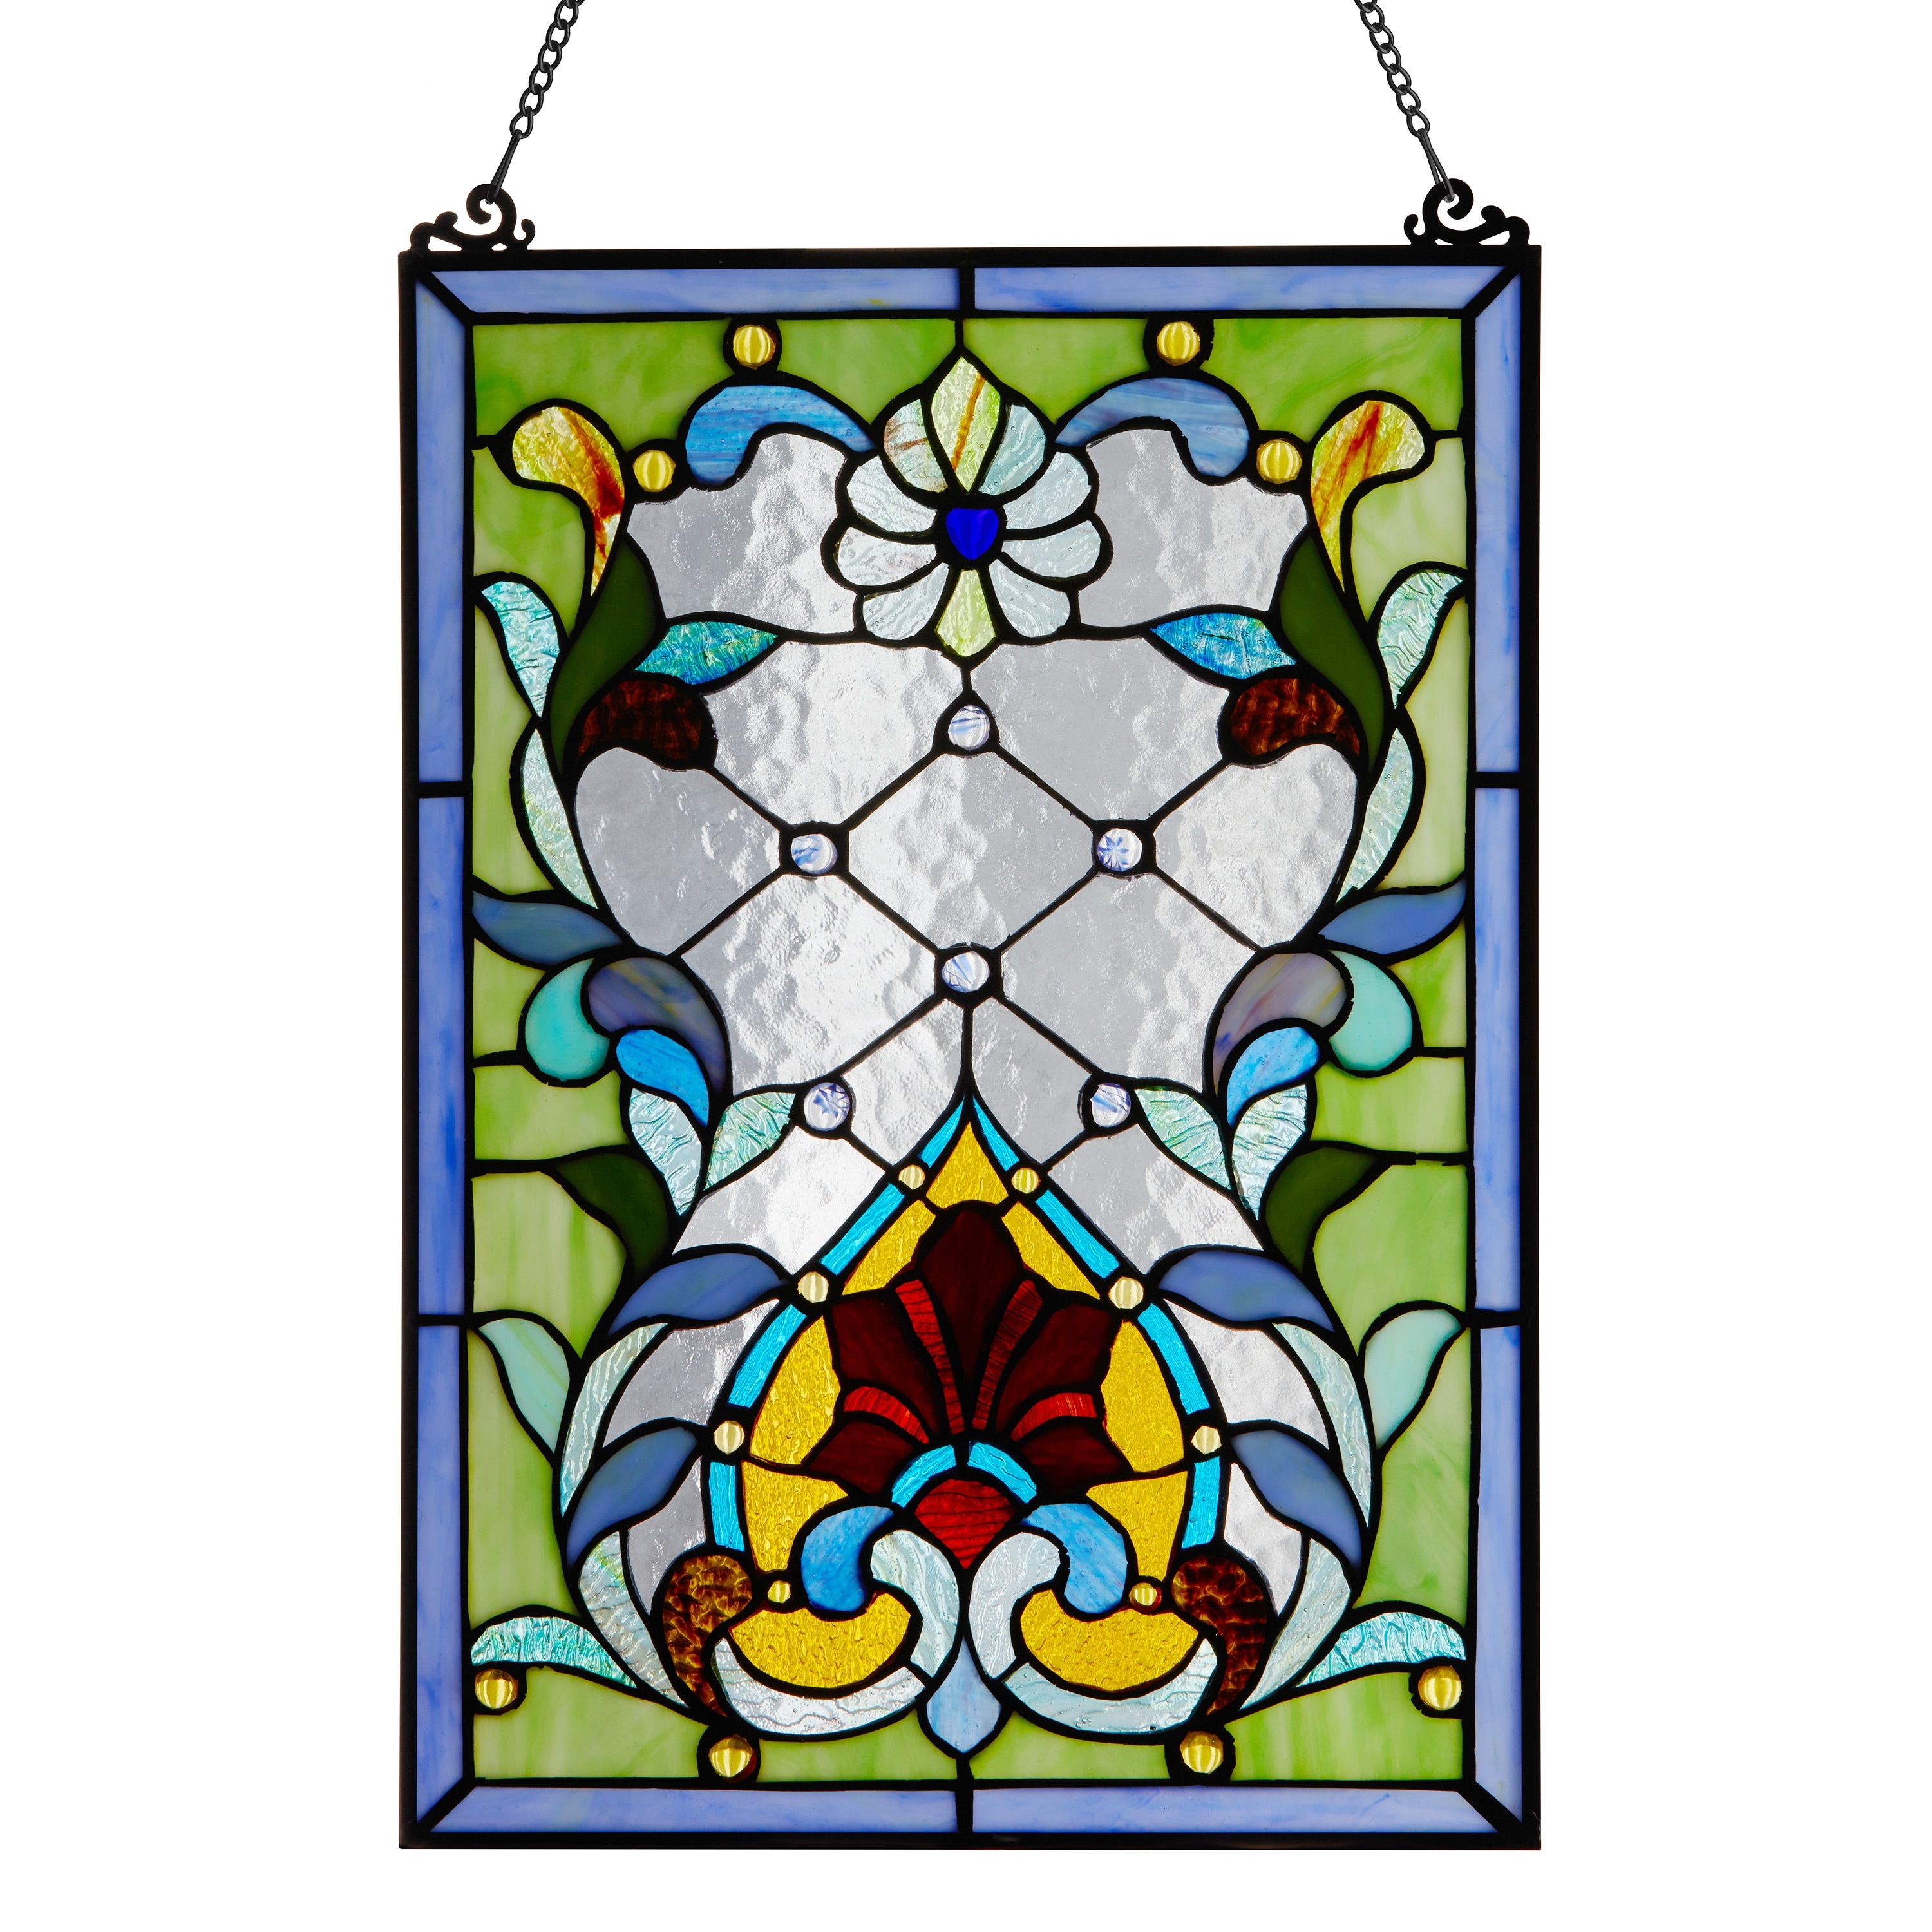 Stained Glass Hummingbird Window Hangings Handcrafted Tiffany Style Sun Cat - 4